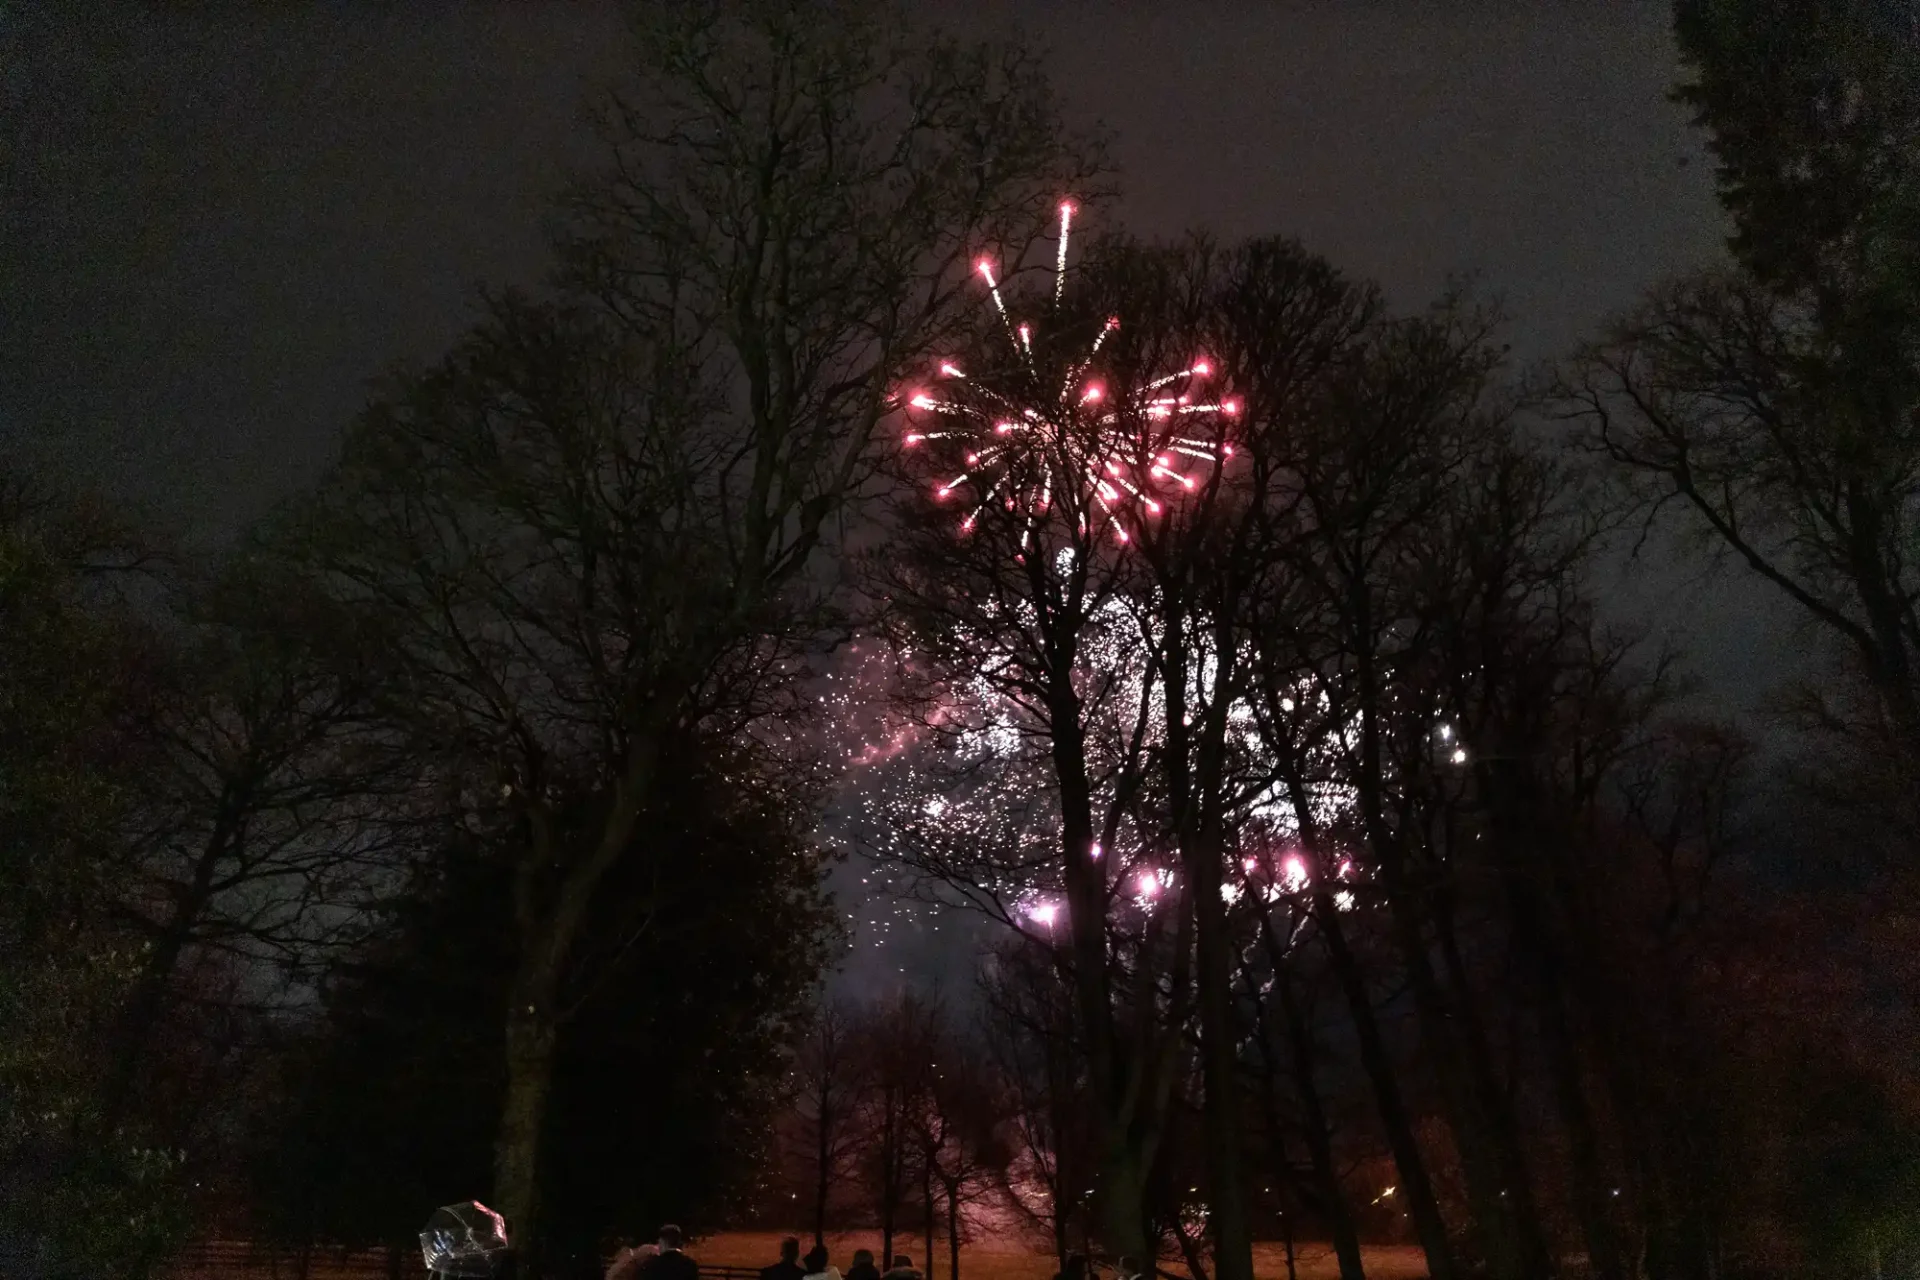 Fireworks bursting in pink and white above silhouette of trees against a dark night sky.